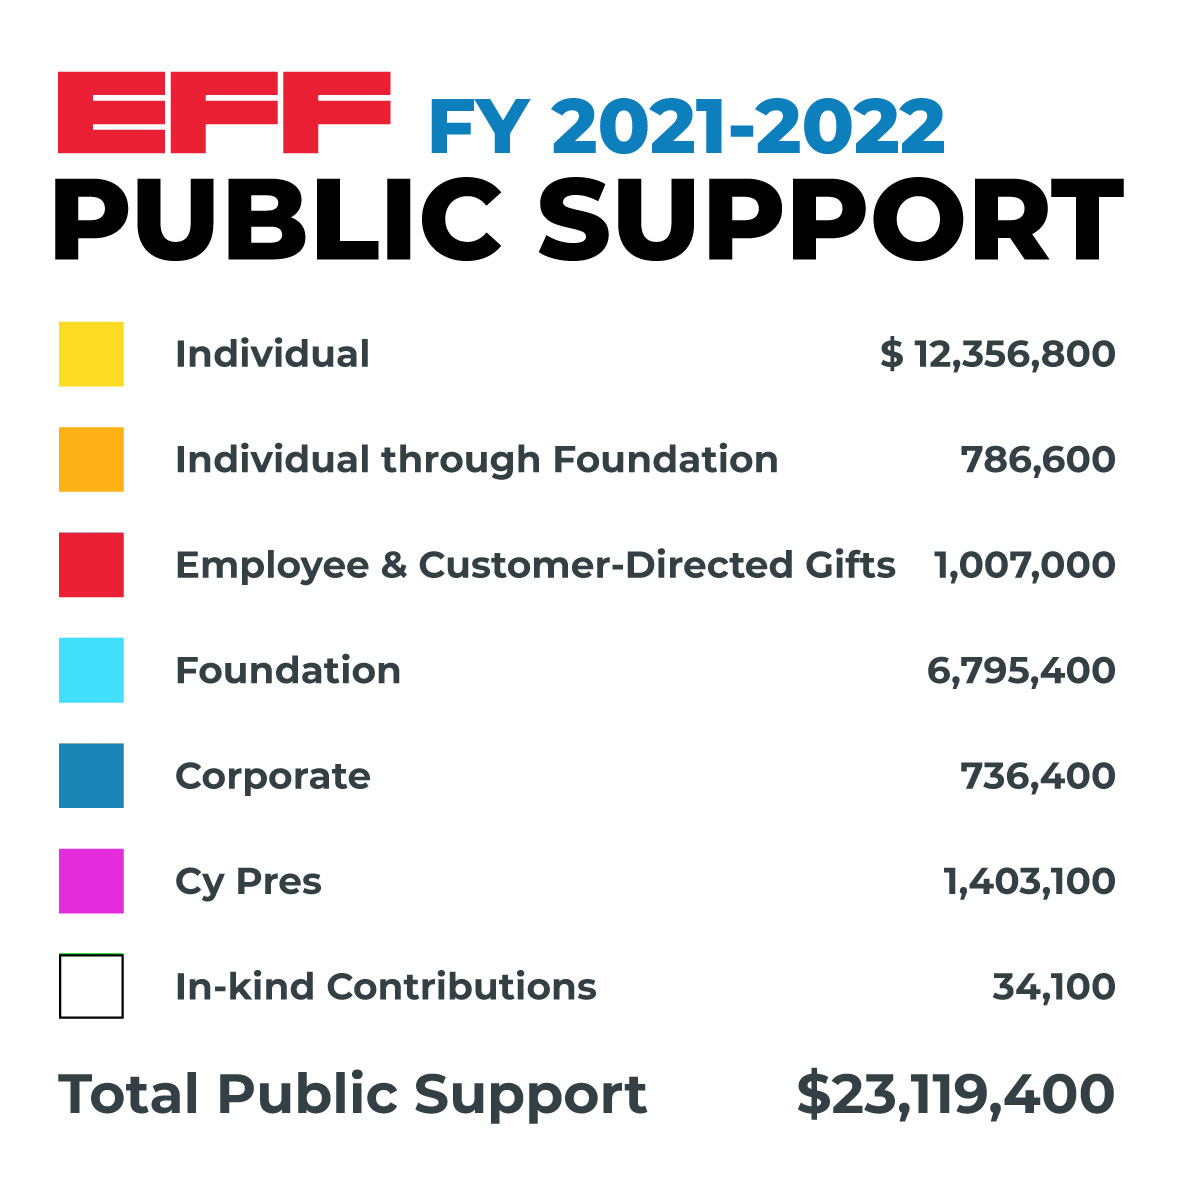 2022 Annual Report Public Support Key